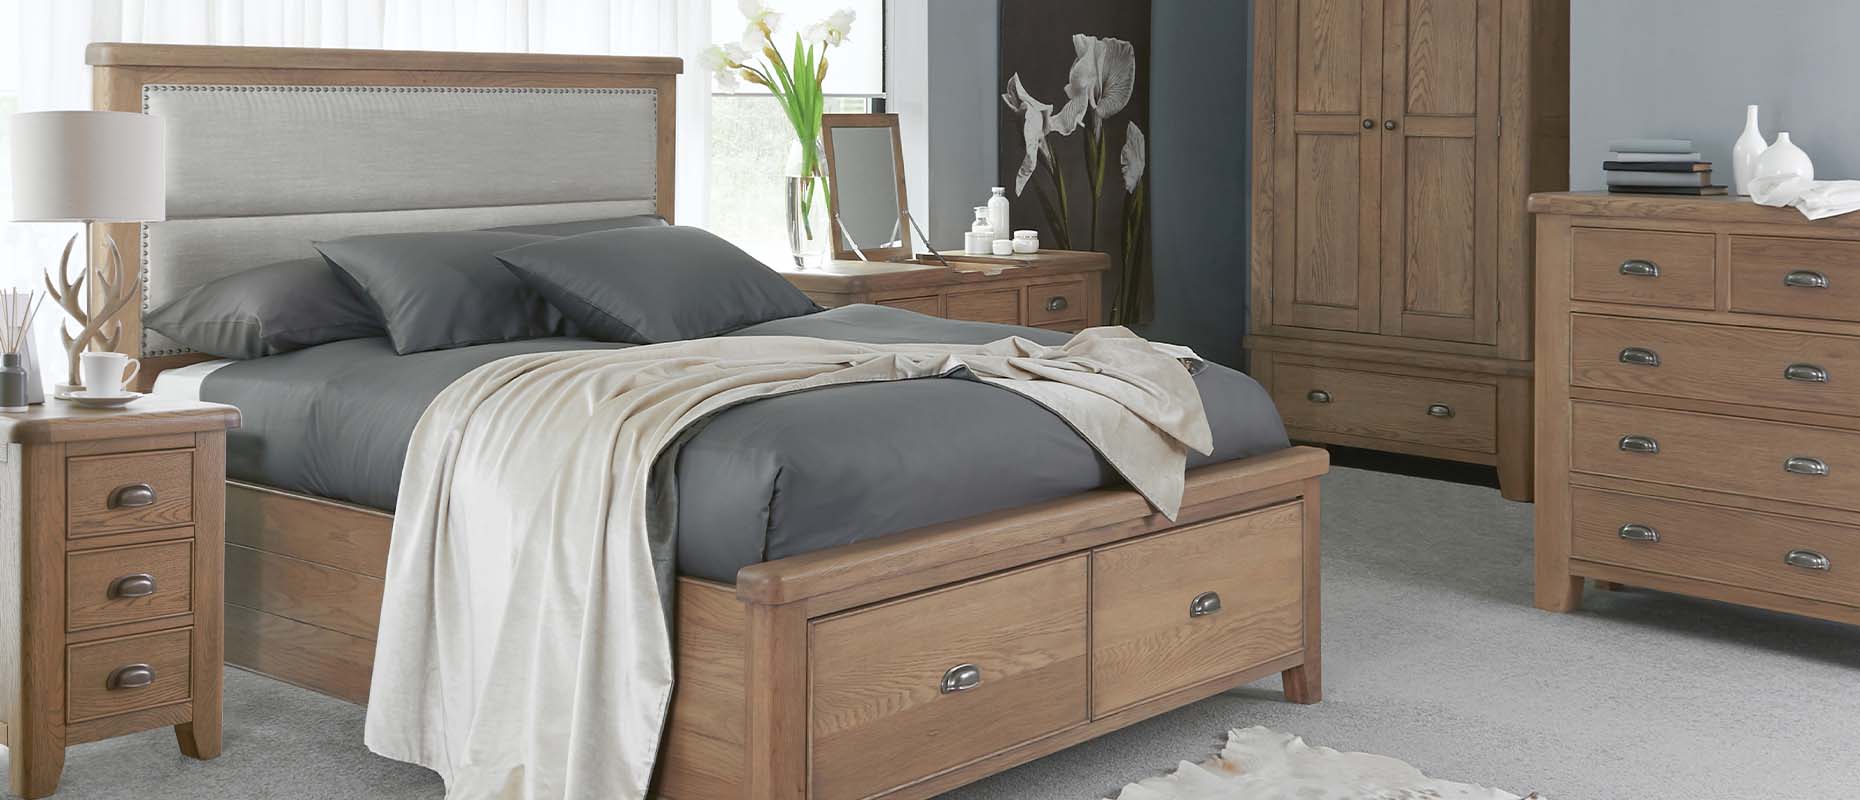 Ryedale bedroom Collection at Forrest Furnishing